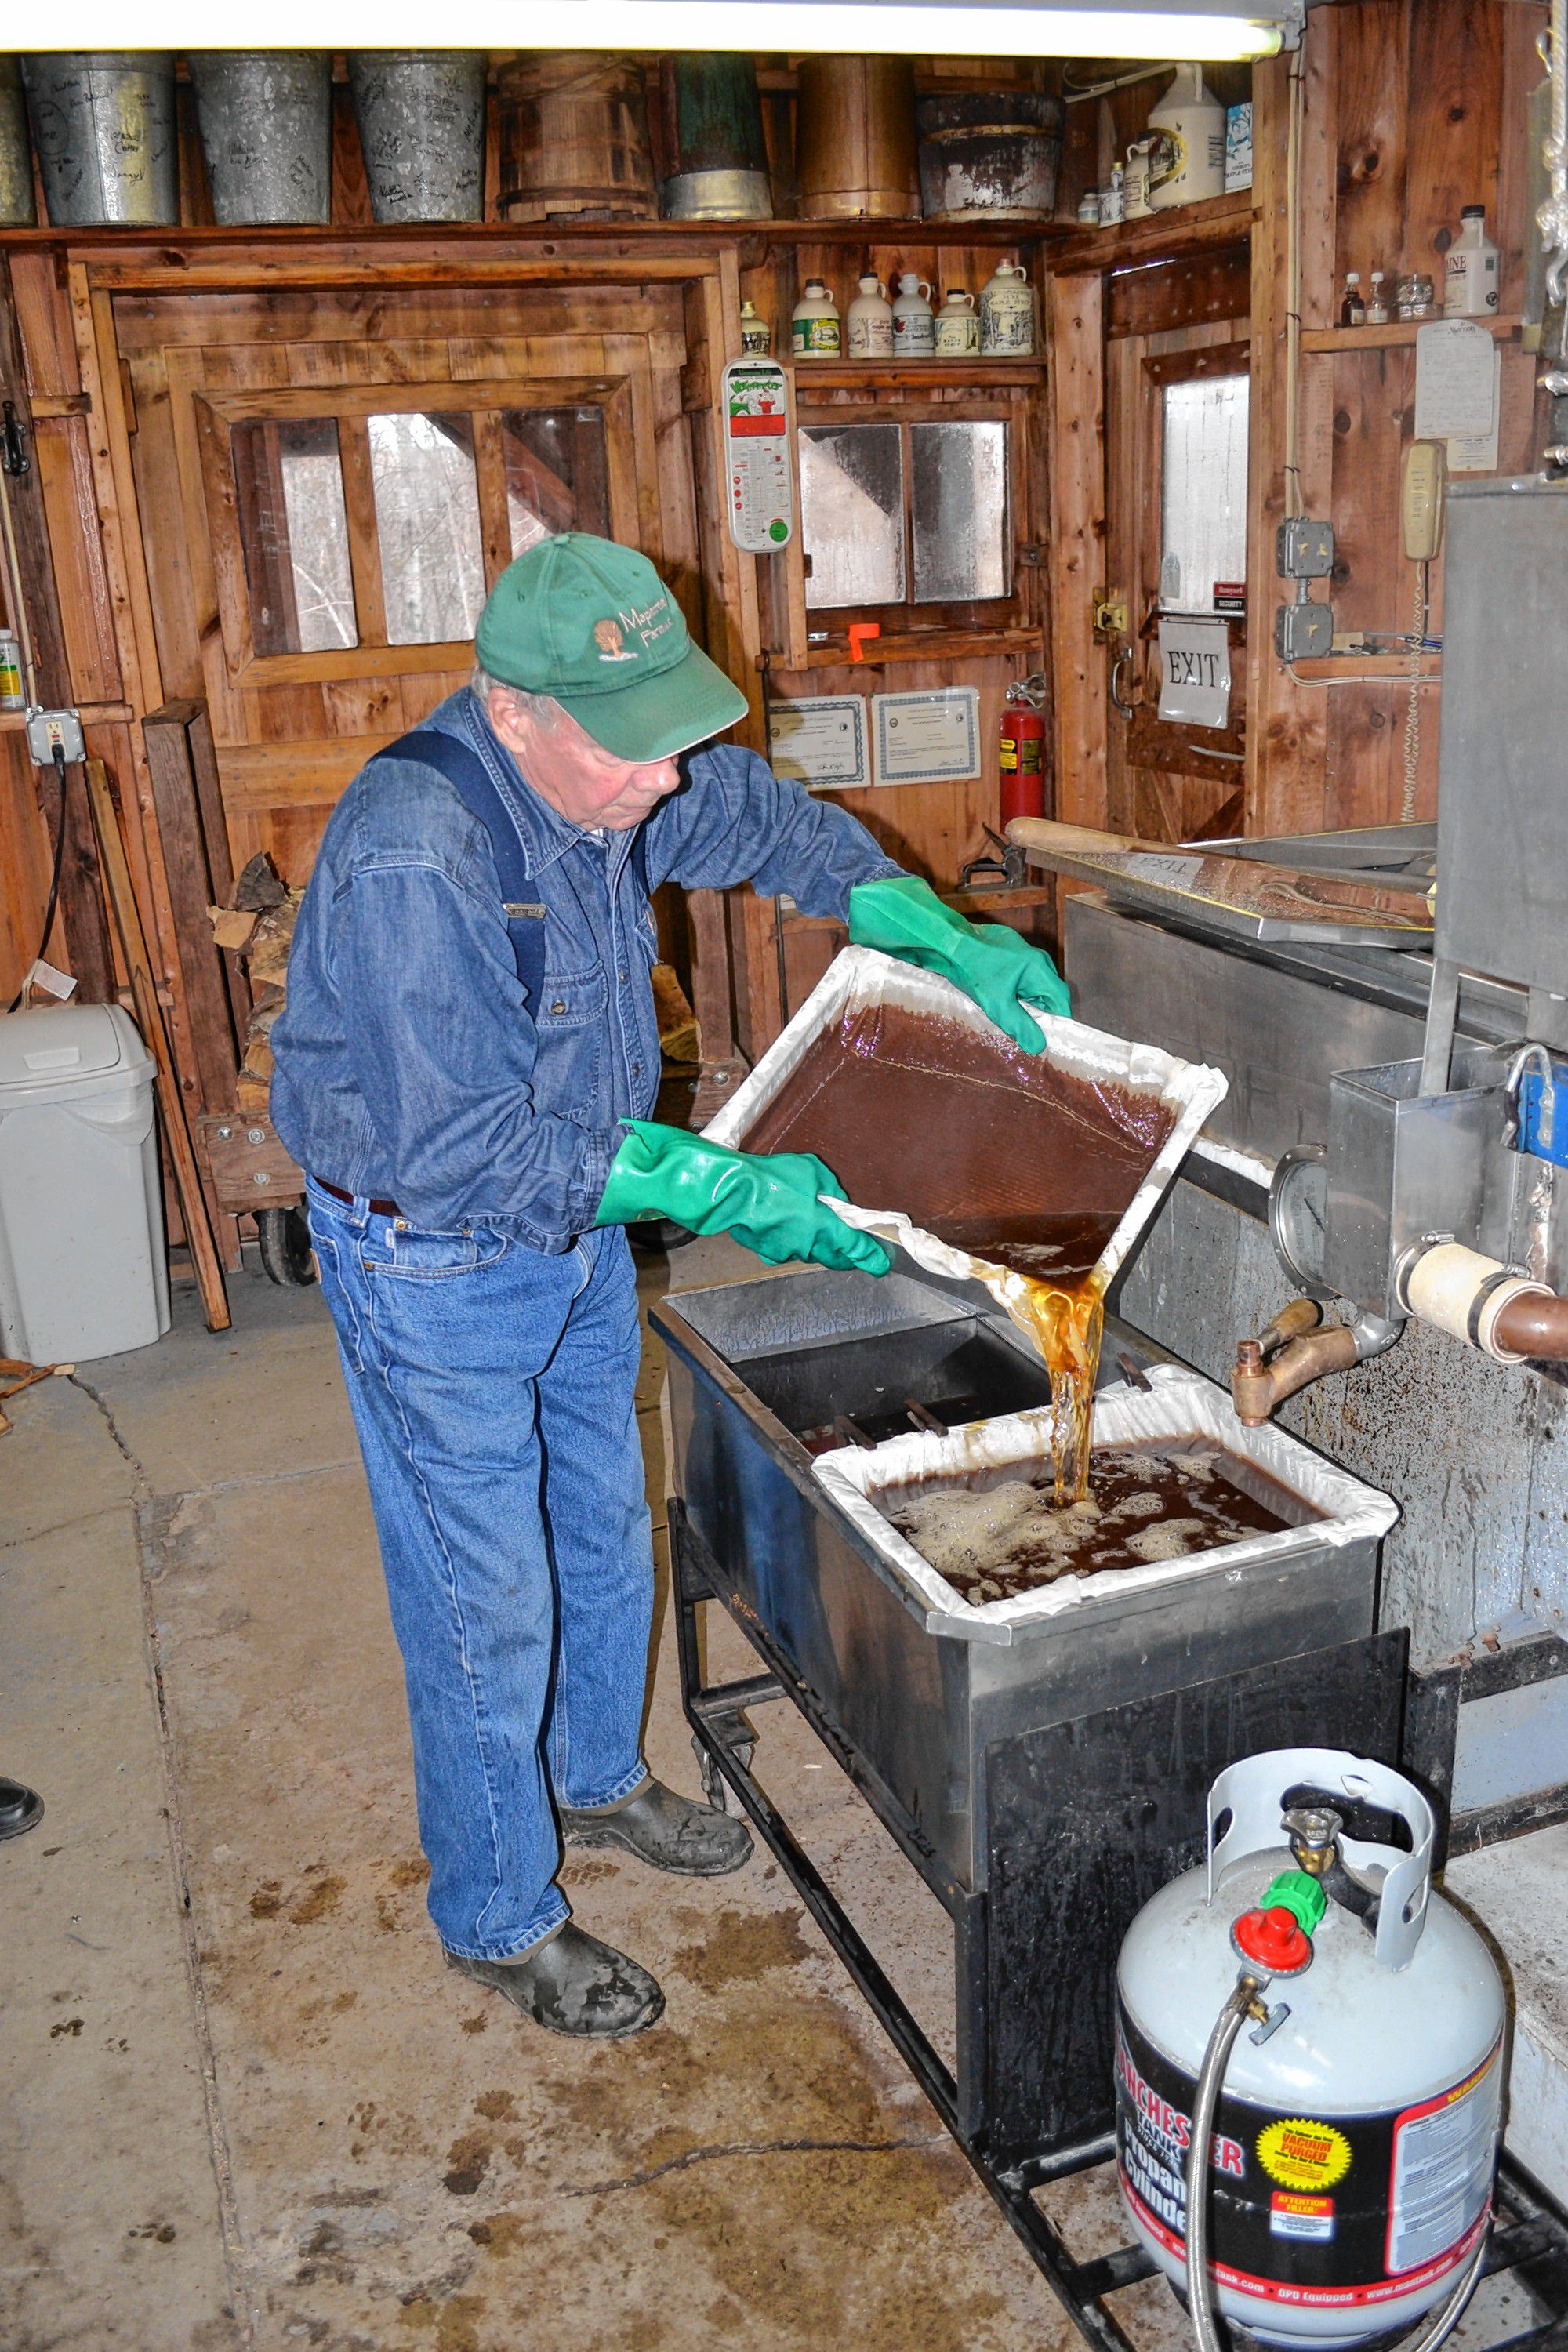 Since Mother Nature didn’t exactly cooperate with all of our ideas for the Maple Issue, we weren’t able to show you the actual process of turning sap into maple syrup. So when Mapletree Farm owner Dean Wilber informed us he had gathered about 1,000 gallons of sap to boil one day last week, you bet we were going to stop by and check it out. After putting all that sap through his reverse osmosis machine, Wilber had 300 gallons of concentrated sap, which turned into a little more than 20 gallons. Top left: Wilber pours fresh syrup through the pre-filter. Top right: It’s always a good sign when you see steam billowing from a sugar house. Above: You need that fire rip-roaring to get the sap boiling.